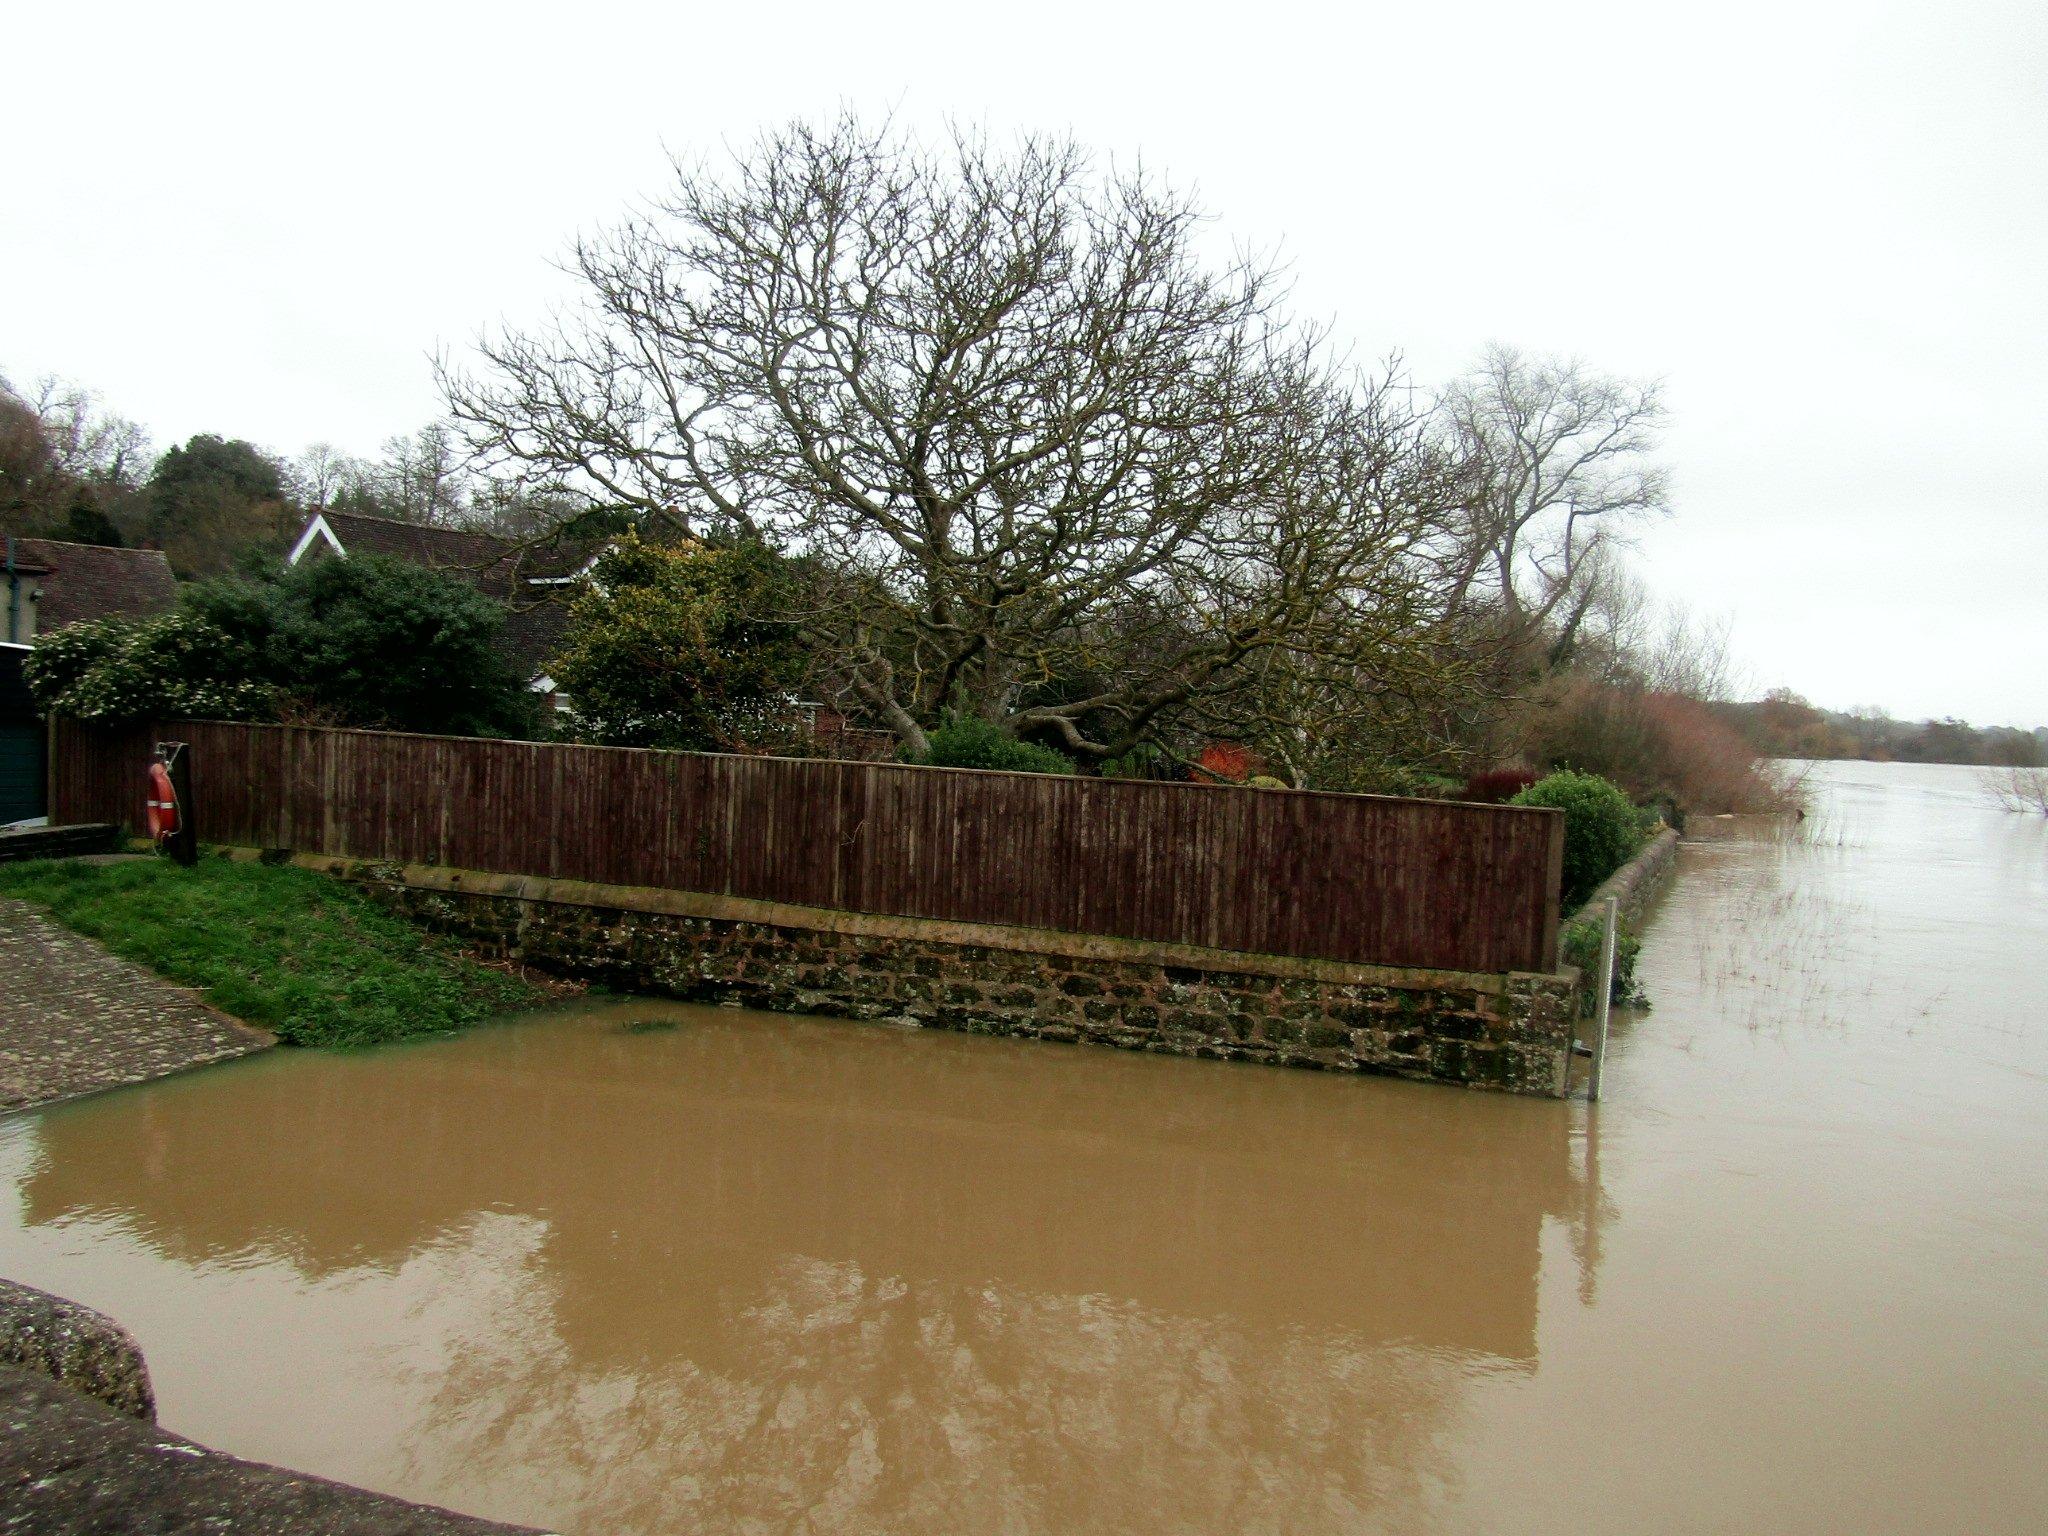 Flooding in Pulborough. Photo by Cynthia Caddell